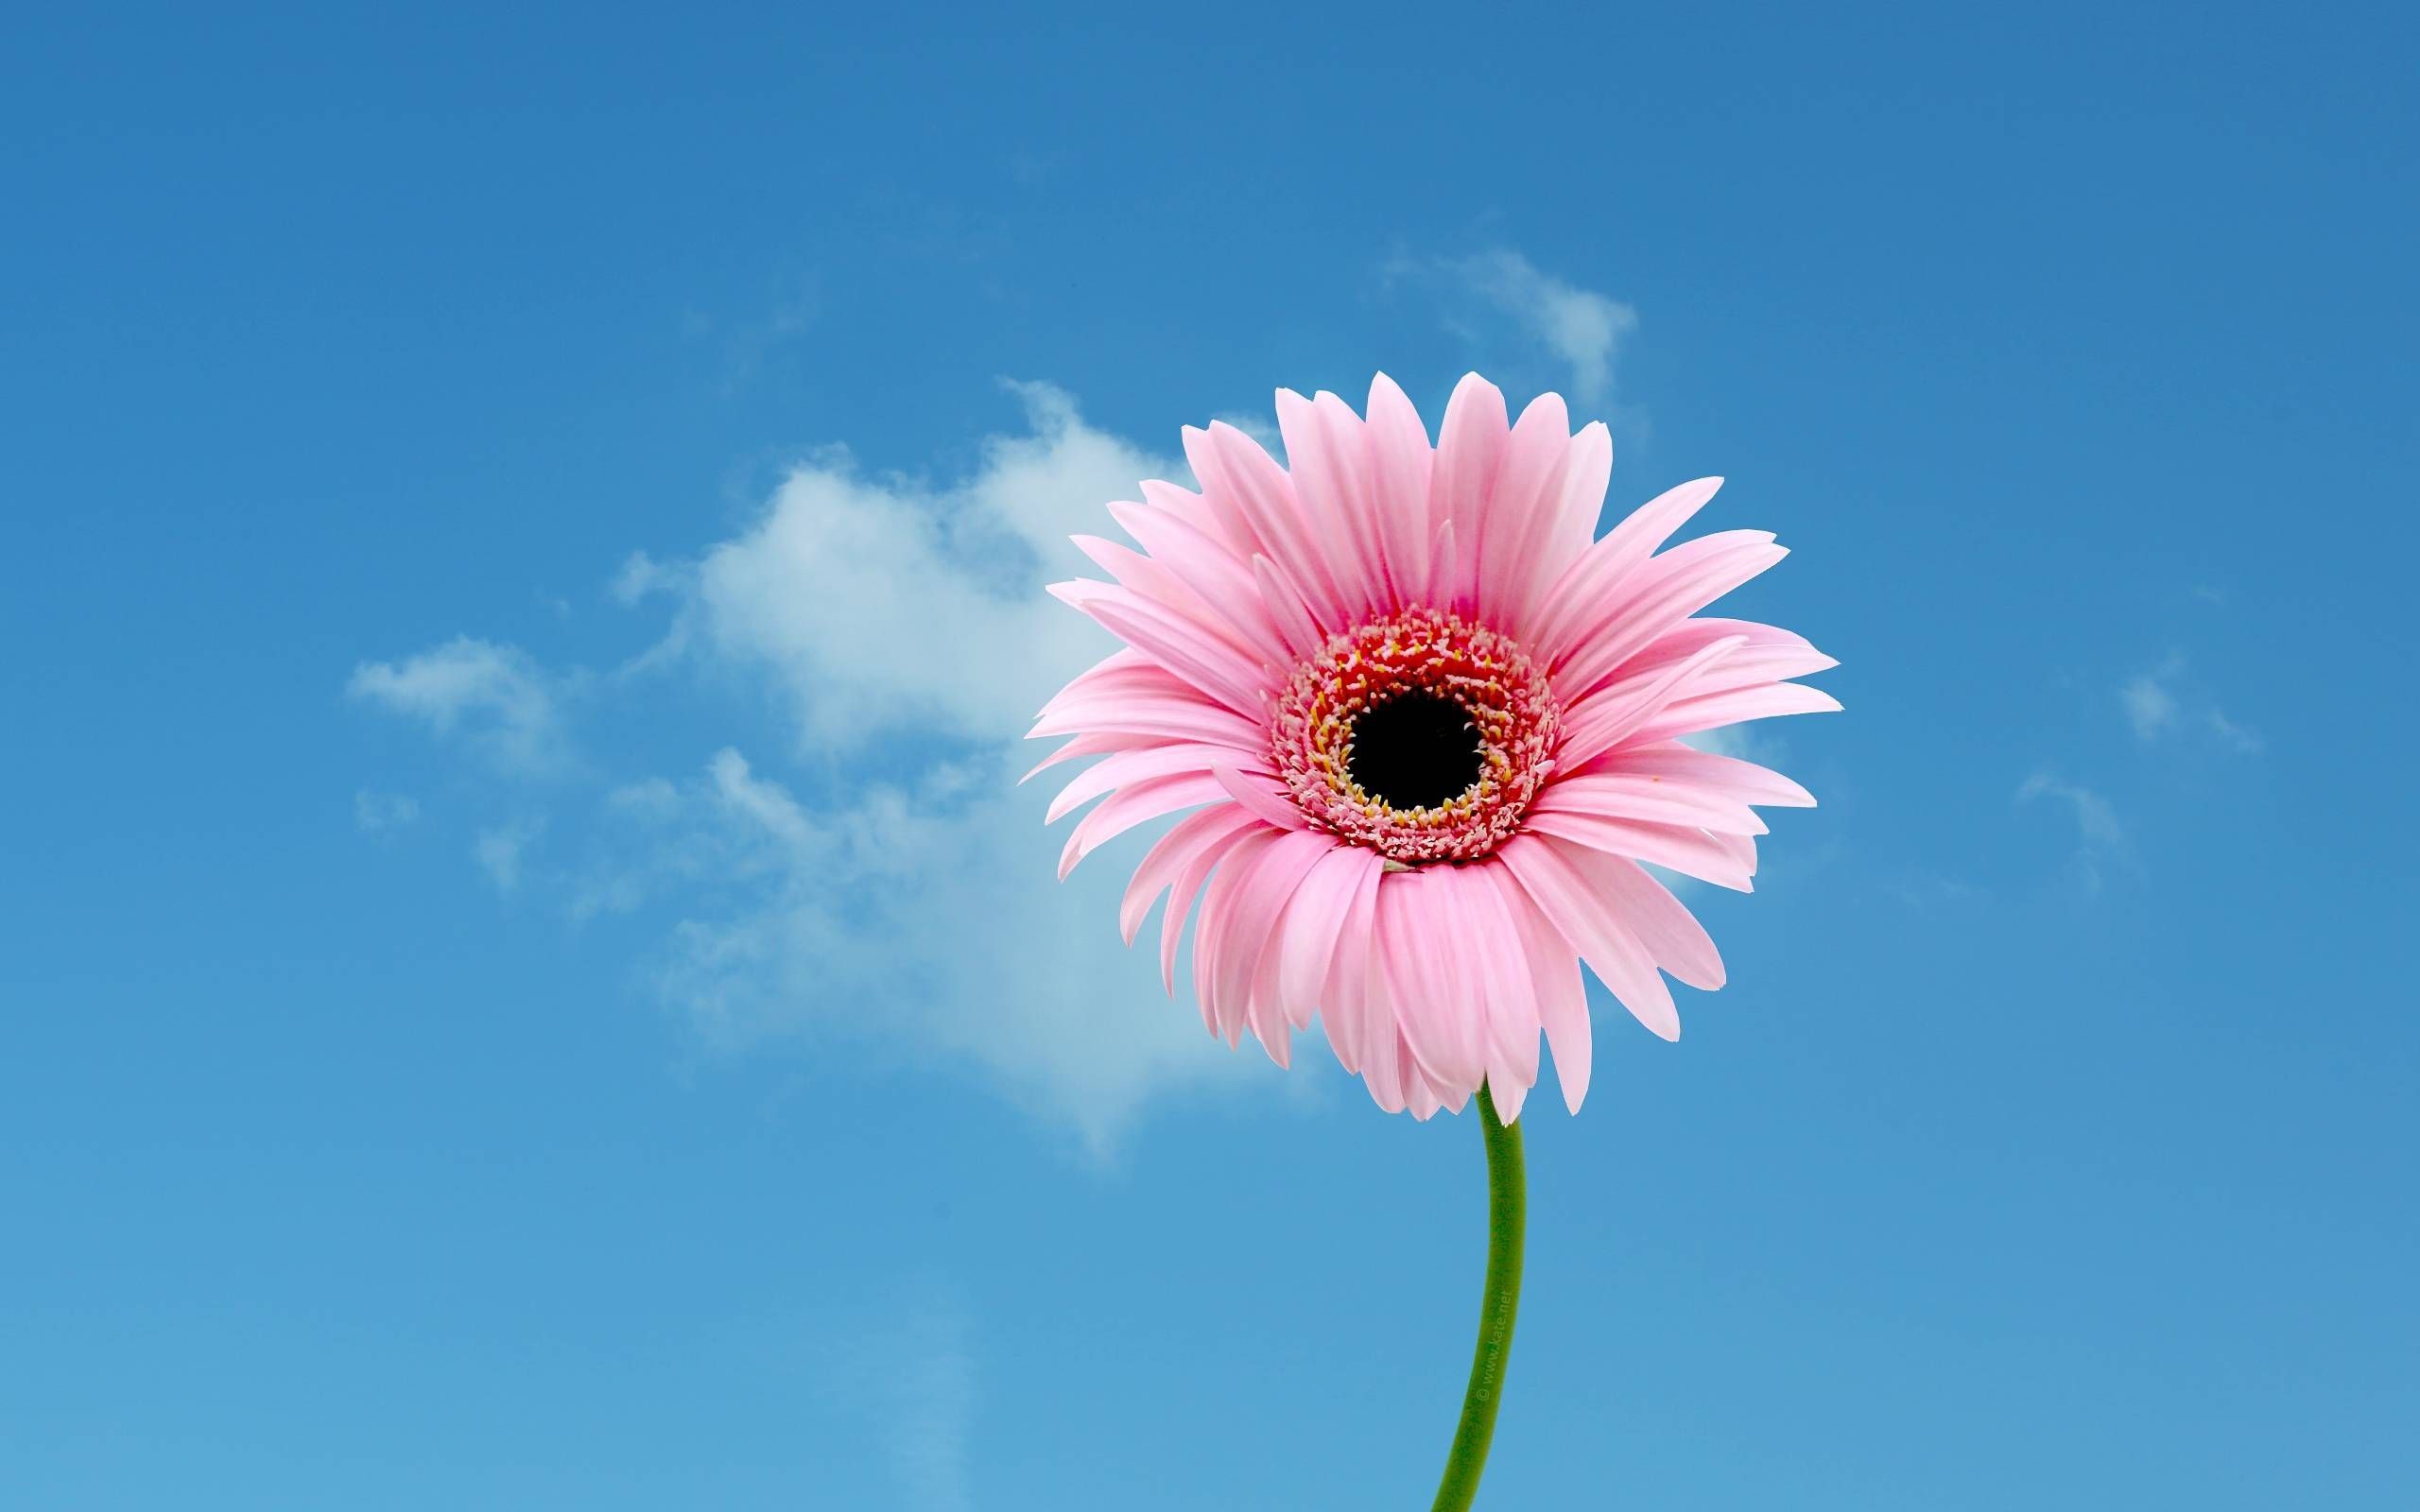 A pink flower is in front of the sky - Daisy